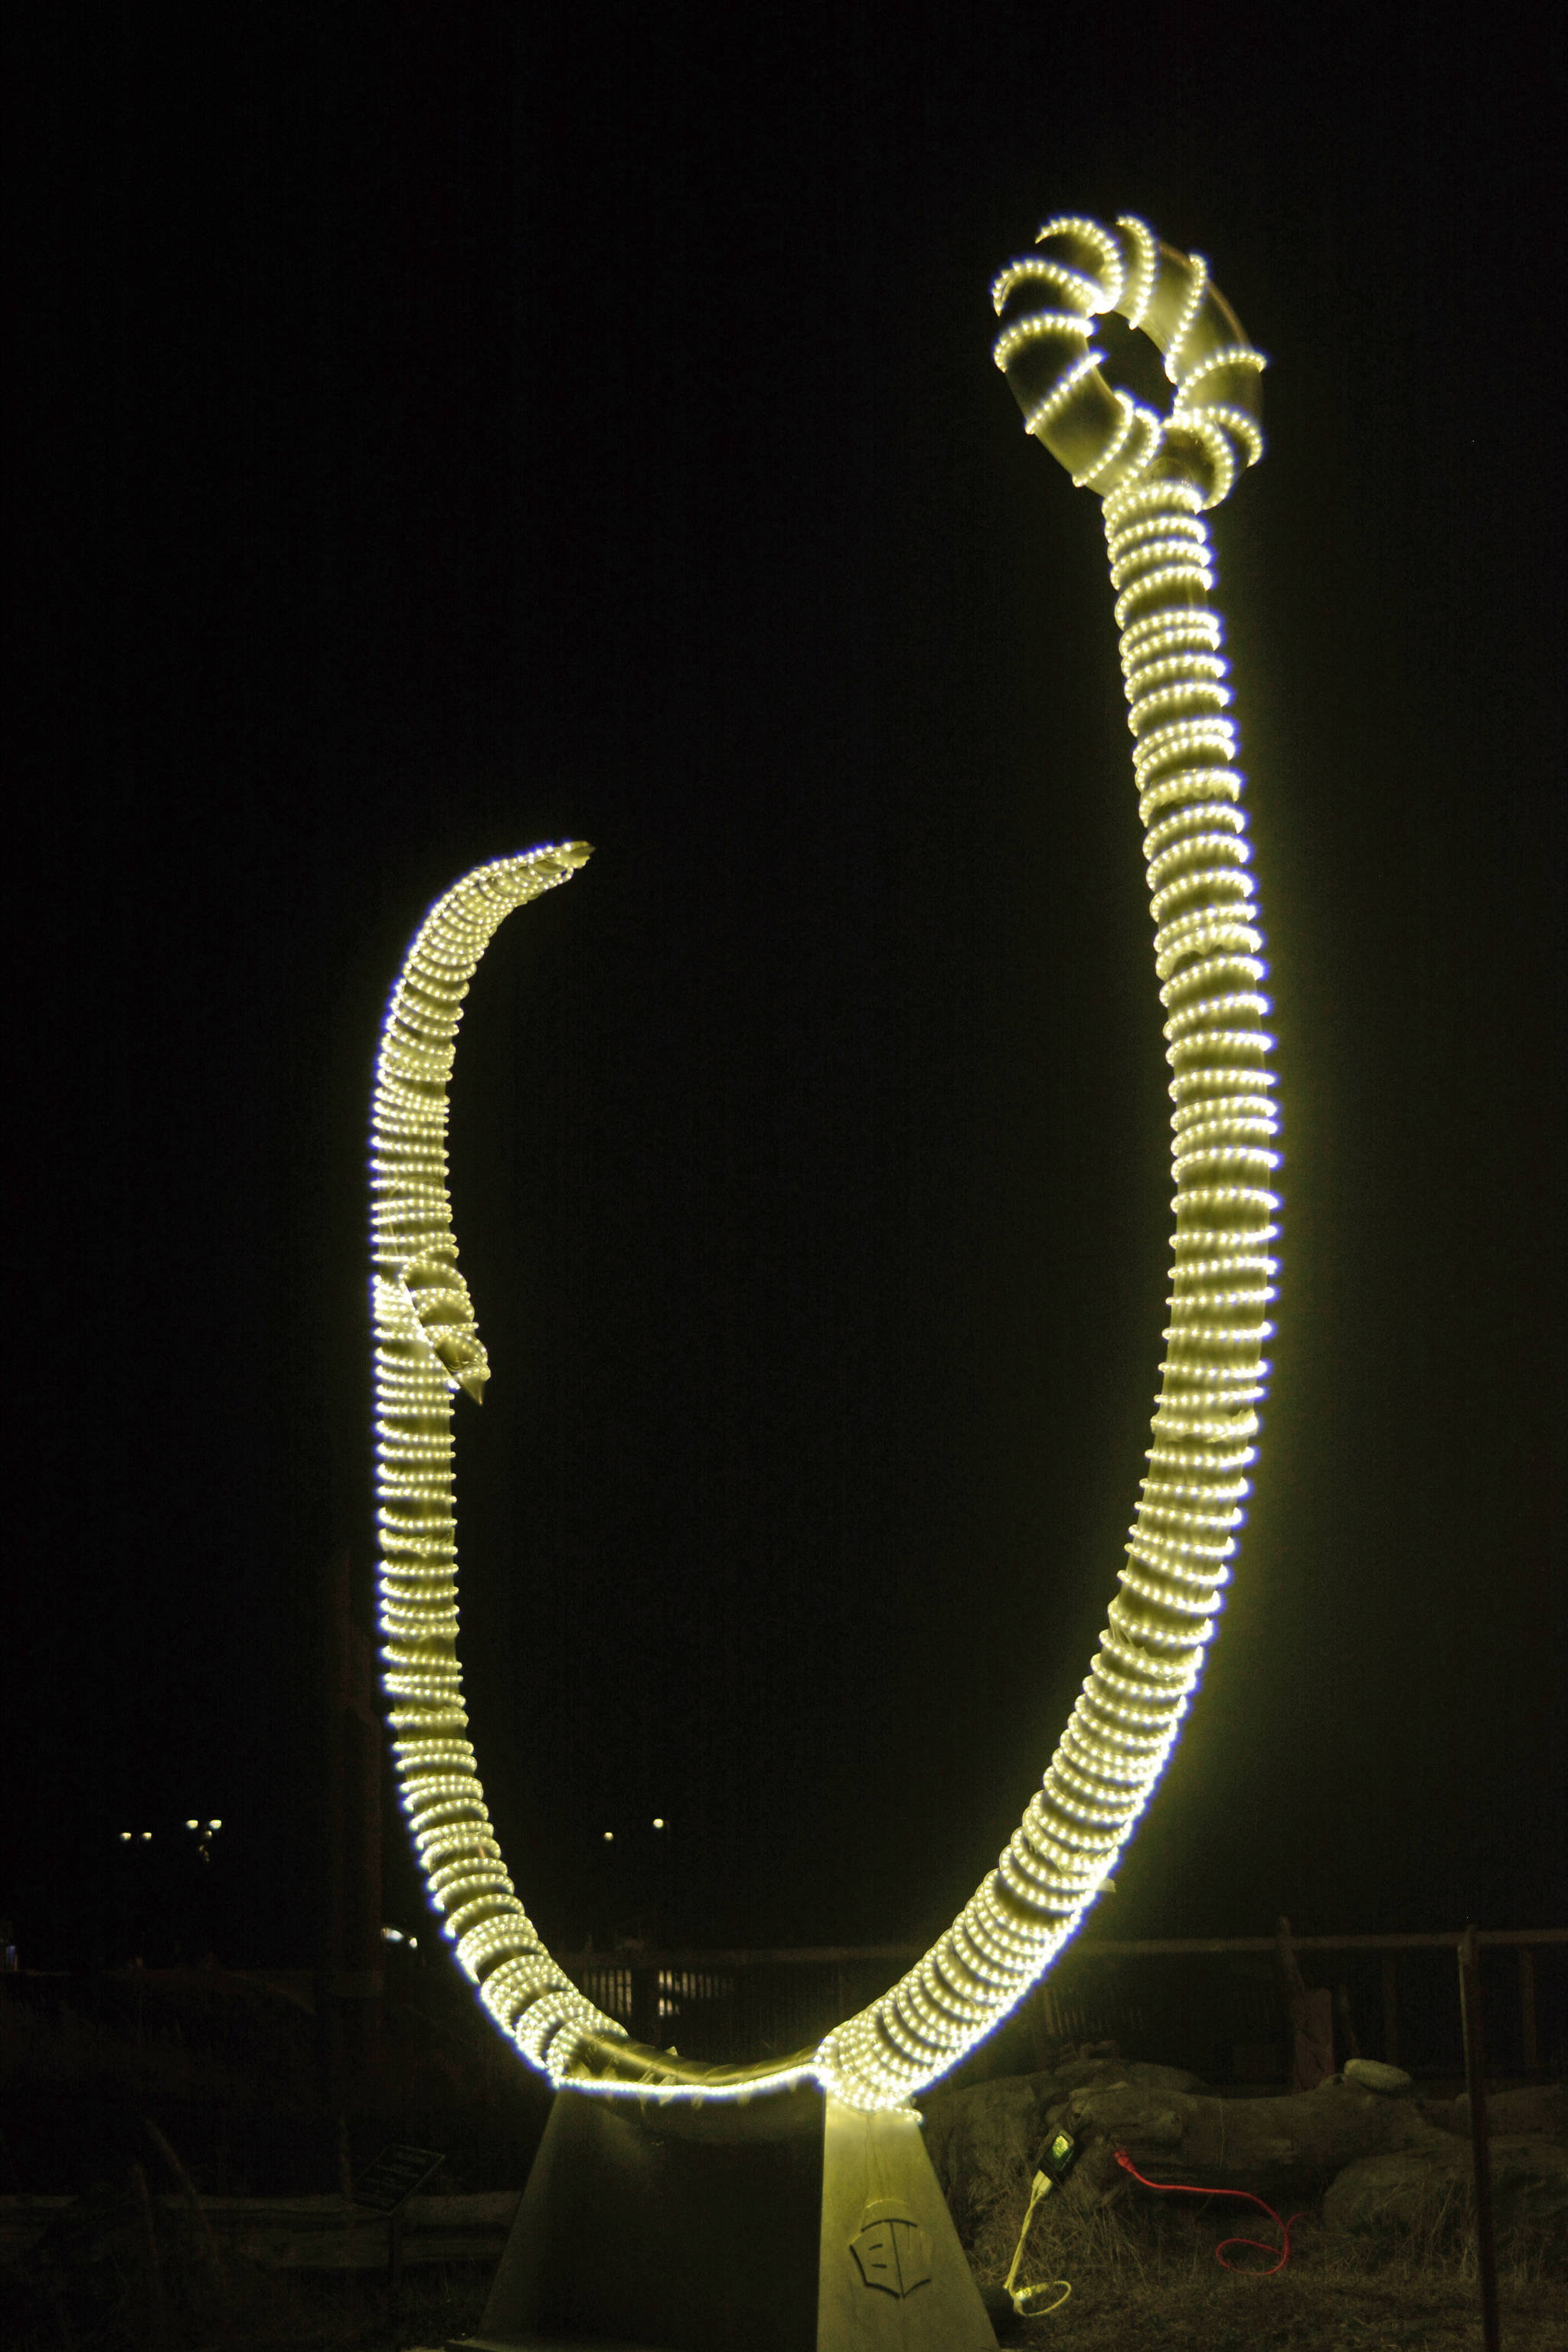 The halibut hook at the Homer Harbor has been wrapped in lights for the dark winter on Nov. 17 in Homer. (Photo by Michael Armstrong/Homer News)